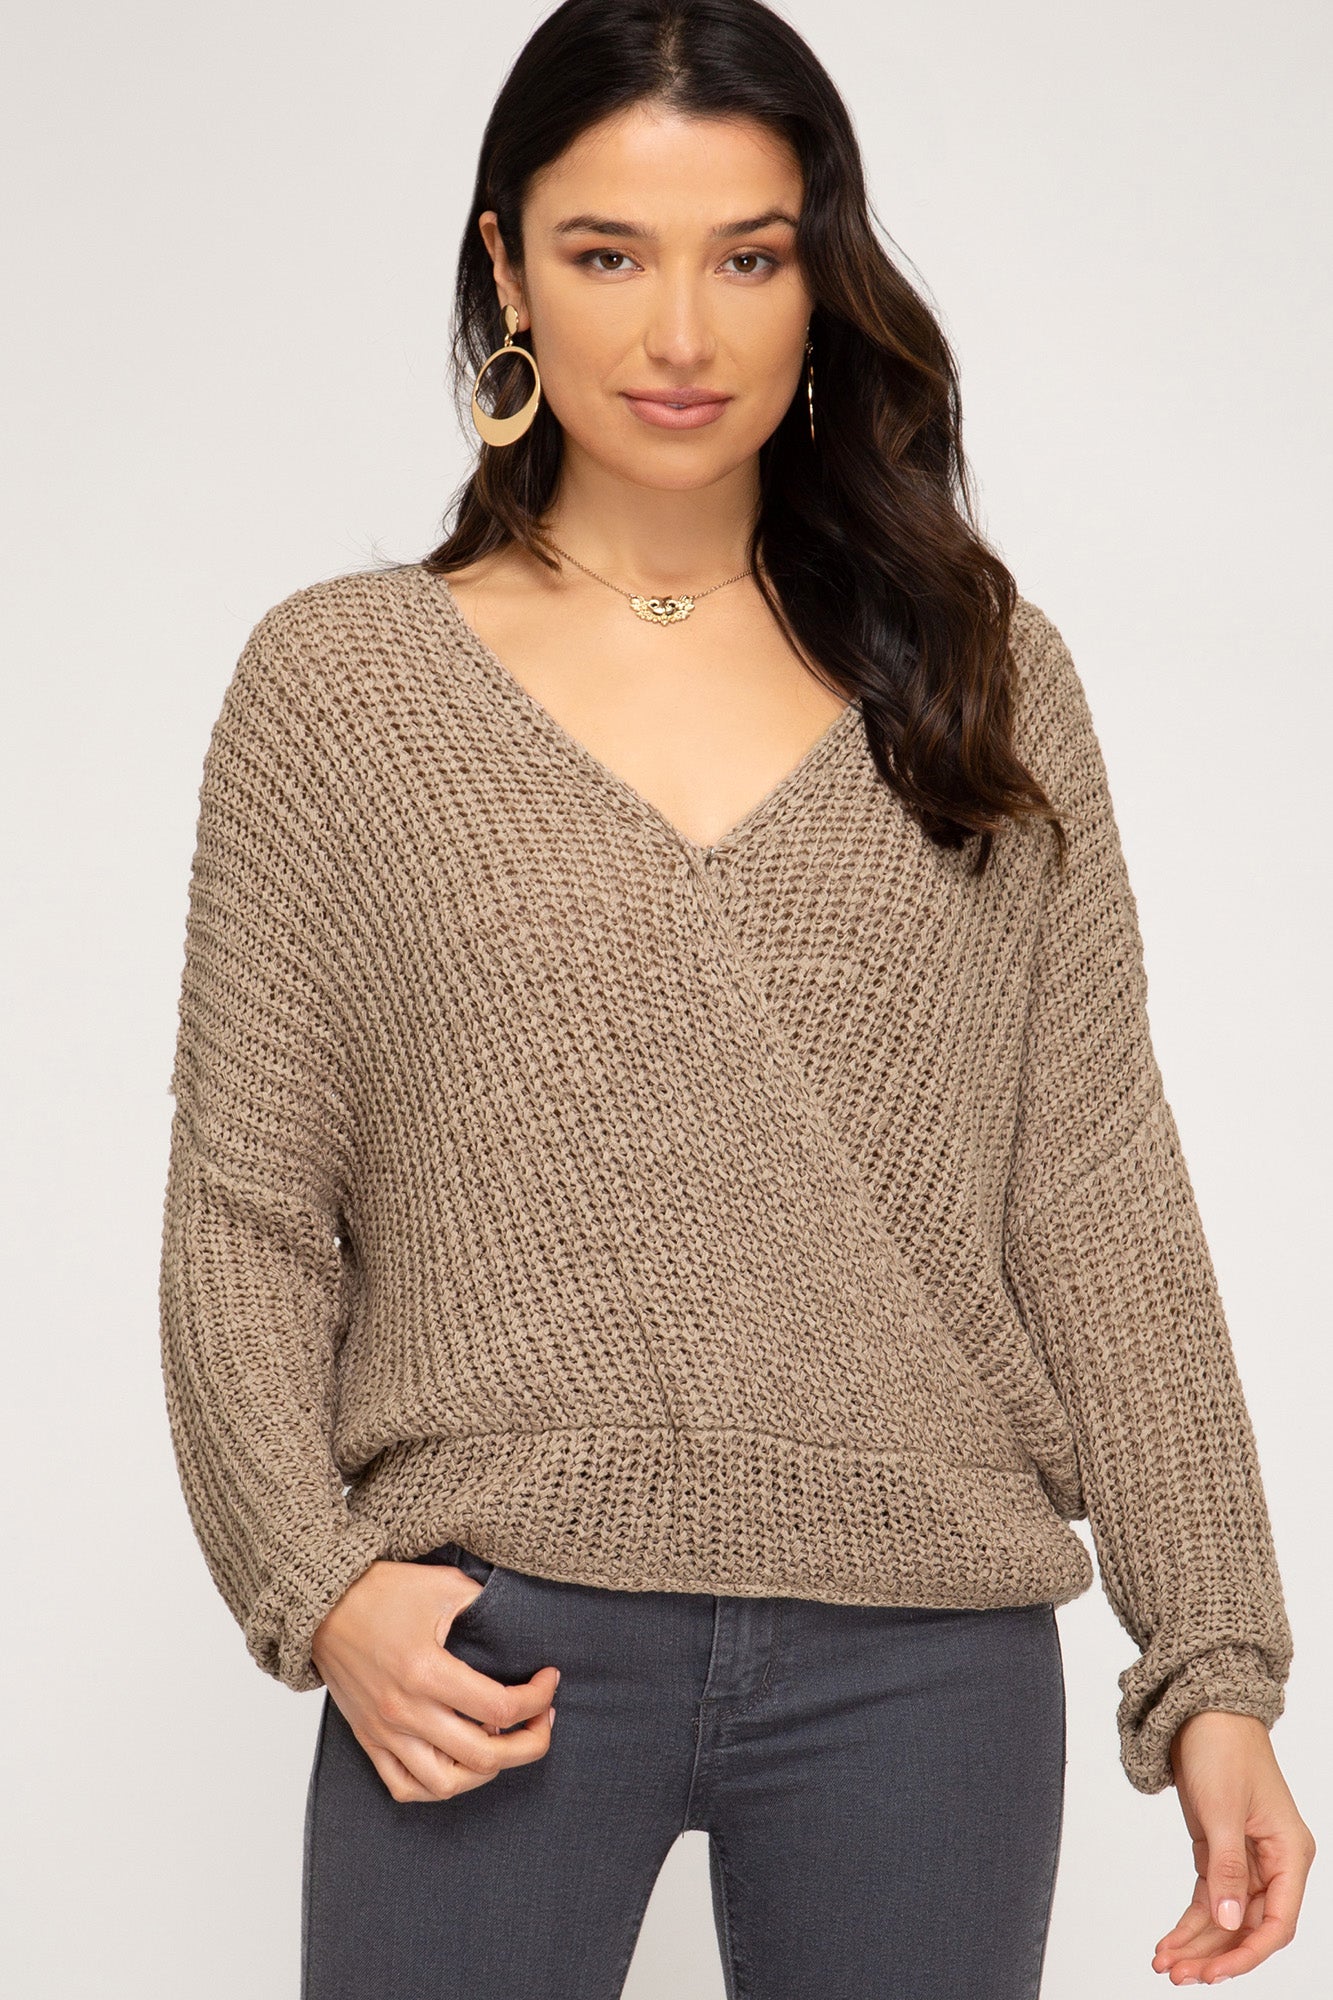 Long Sleeve Sweater With Open Back!